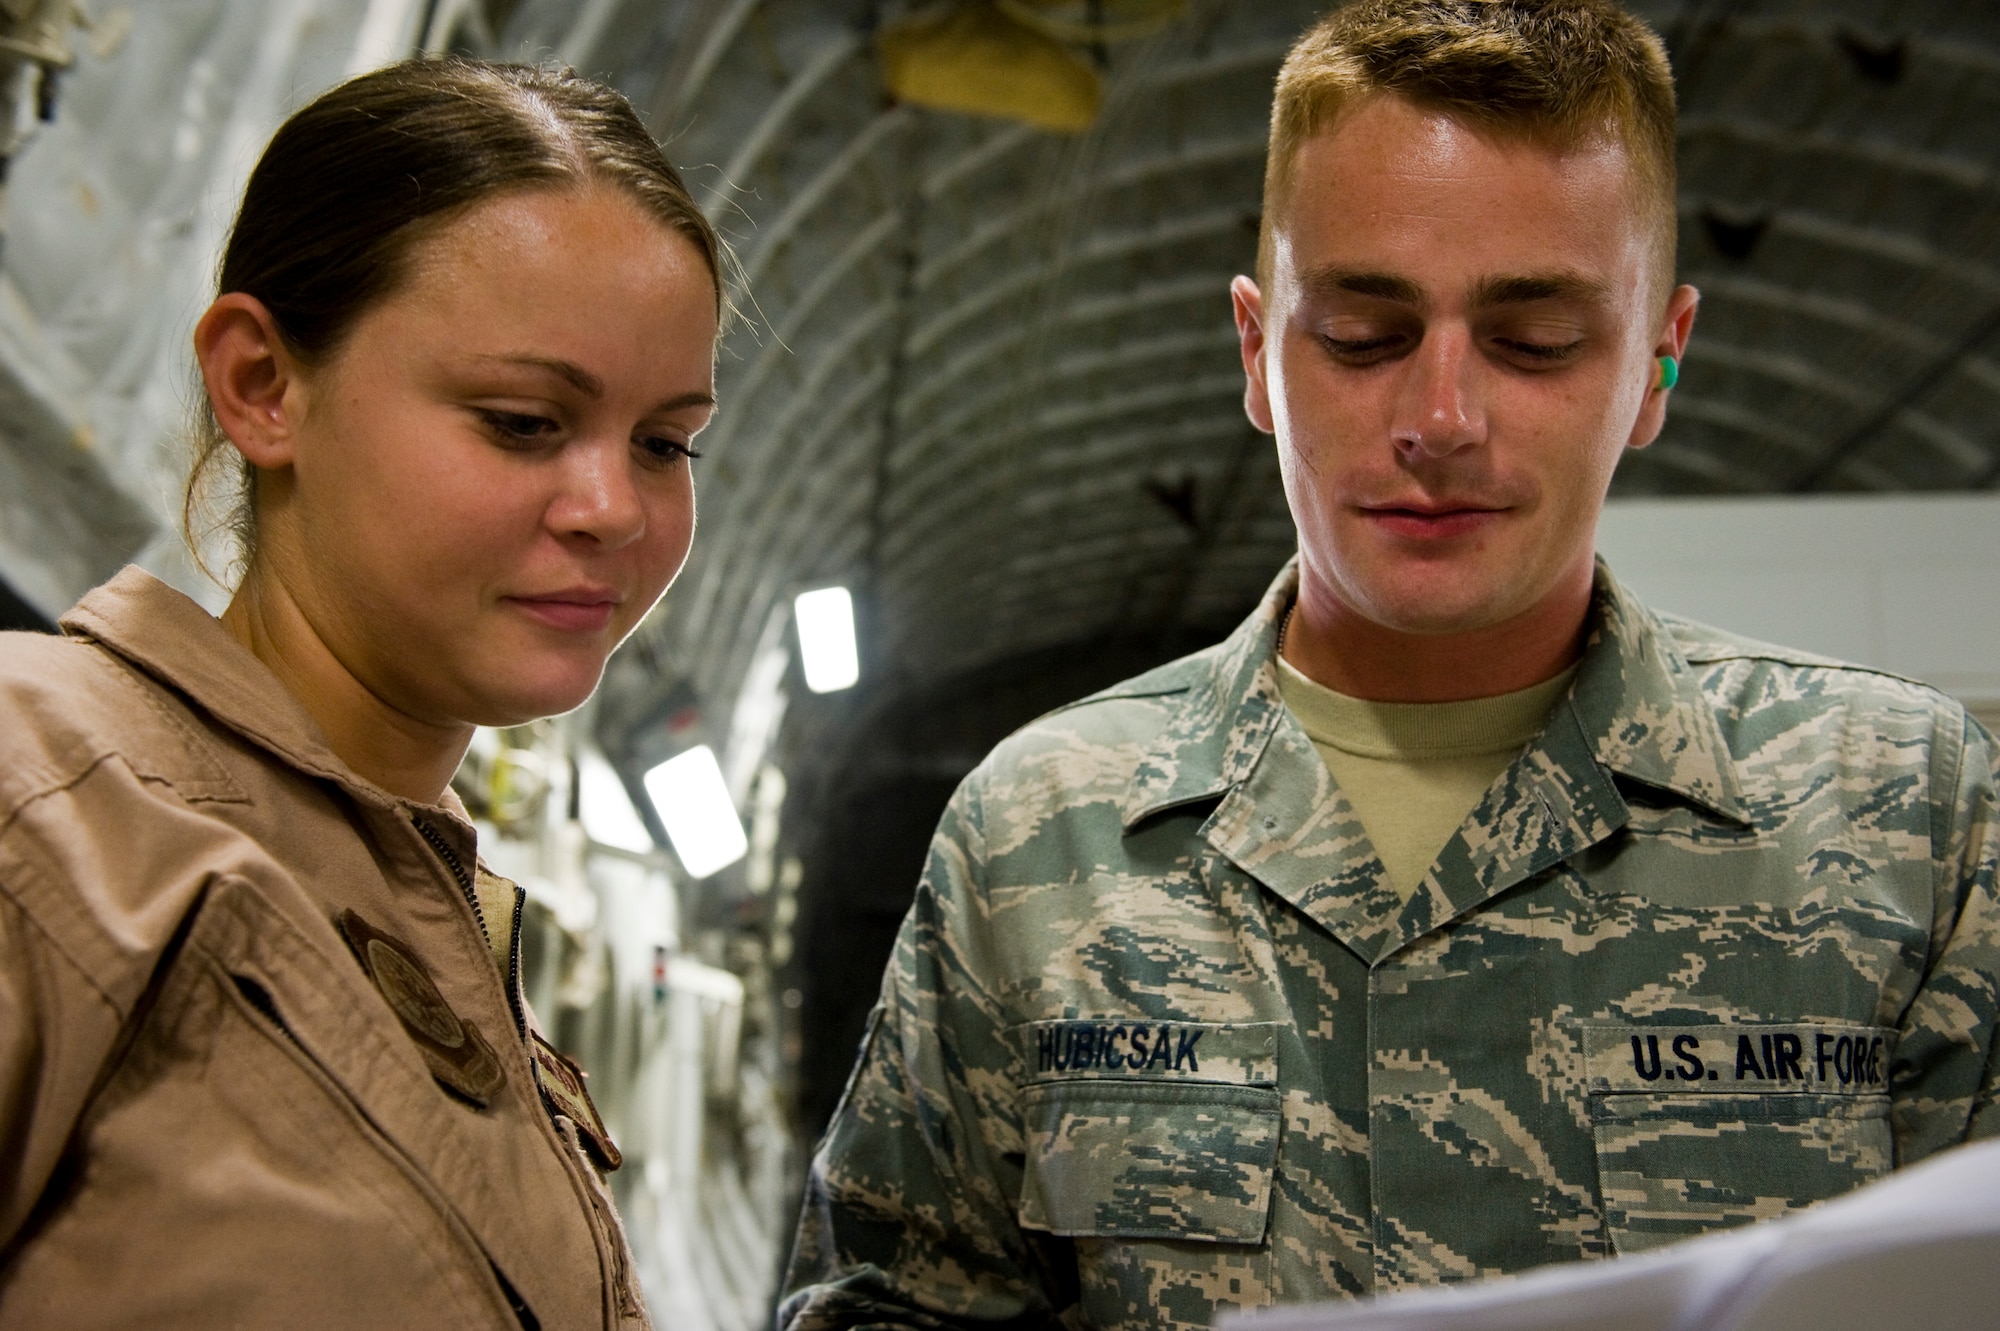 Staff Sgt. John Hubicsak discusses load plans with Airman 1st Class Brittany McGarrity on a C-17 Globemaster III at the 379th Air Expeditionary Wing in Southwest Asia, July 12, 2013. Hubicsak is an 8th Expeditionary Air Mobility Squadron air terminal operations center information controller deployed from Ramstein Air Base, Germany, and McGarrity is an 816th Expeditionary Airlift Squadron C-17 loadmaster deployed from Joint Base Charleston, S.C. (U.S. Air Force photo/Senior Airman Benjamin Stratton)